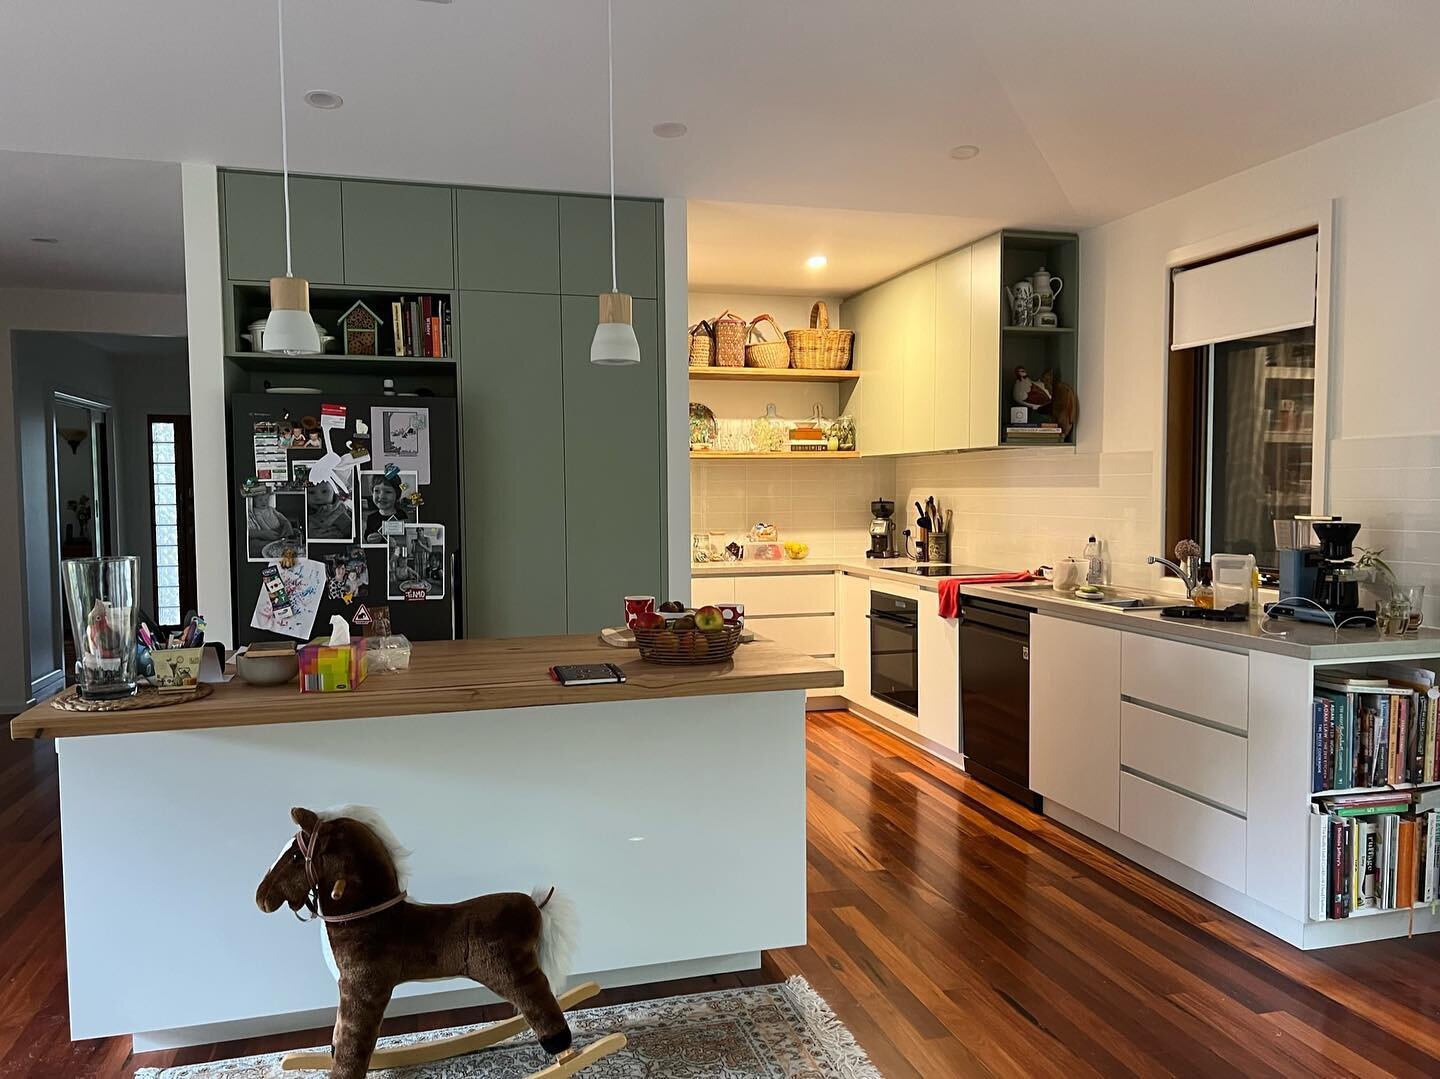 It&rsquo;s lovely to see our recently completed Daylesford project inhabited !

#kitchendesign #renovation #residentialdesign #herestudio